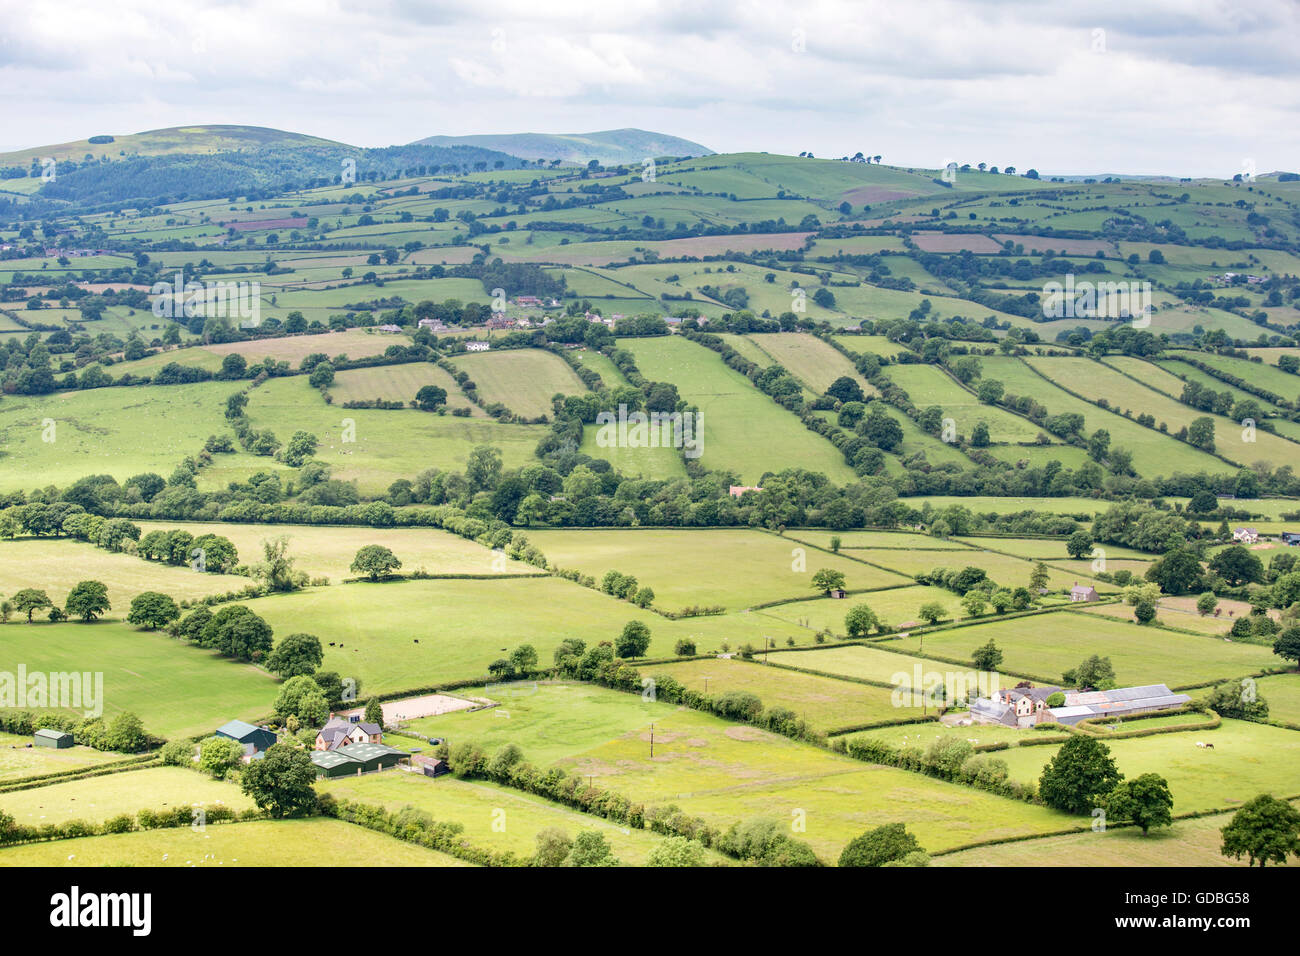 The Shropshire landscape and it's historic field systems, Shropshire, England, UK Stock Photo